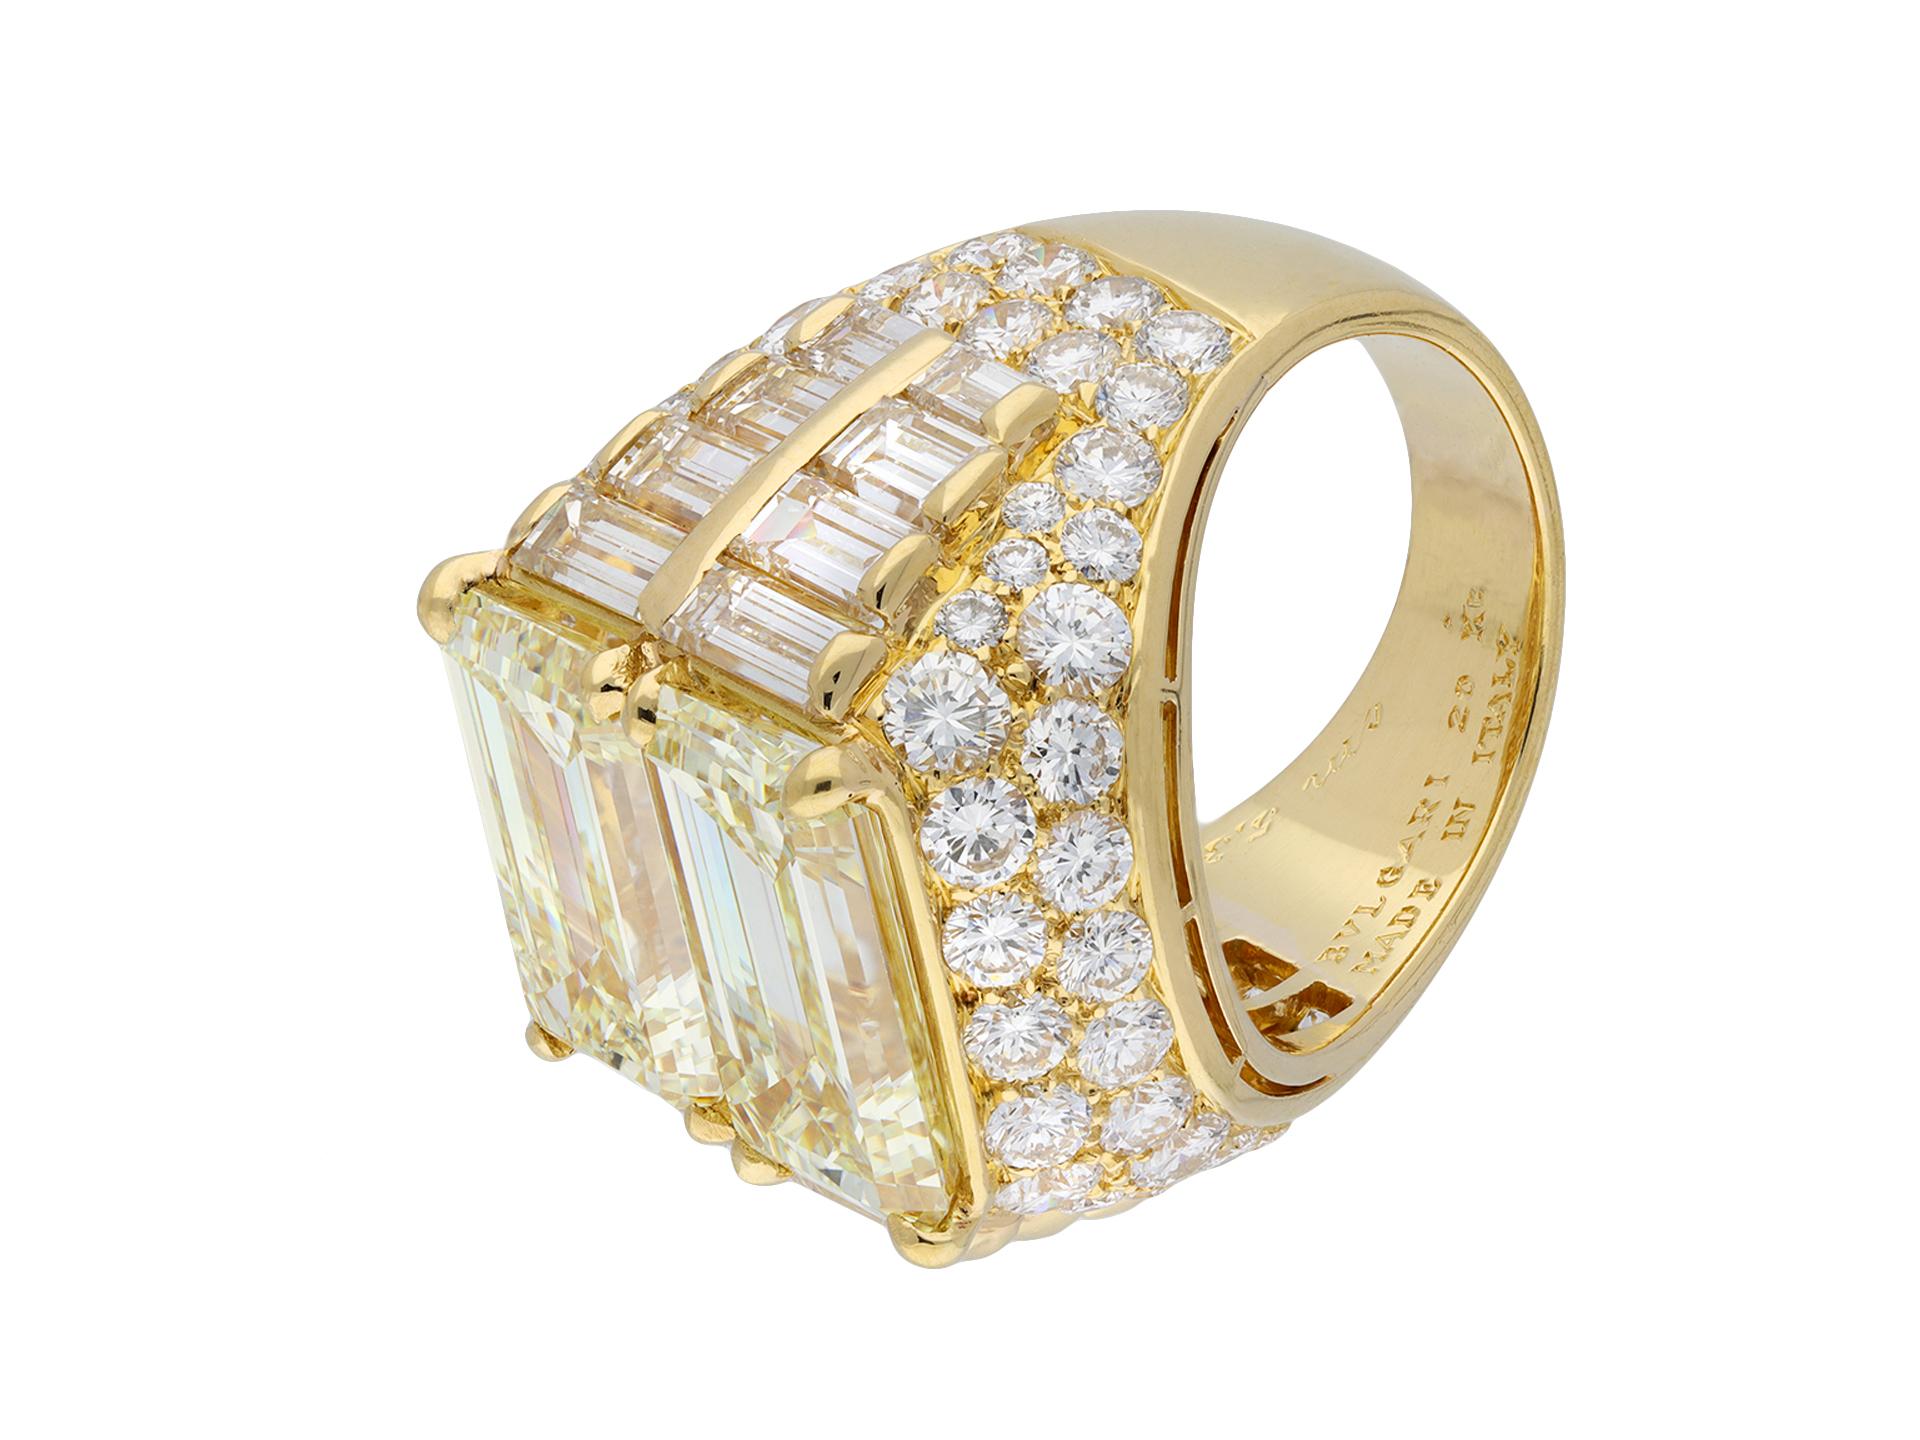 Bulgari diamond 'Trombino' ring. An important piece, set horizontally to centre with two emerald-cut diamonds in open back claw settings with an approximate combined weight of 10.16 carats, flanked by sixteen vertically set rectangular baguette cut